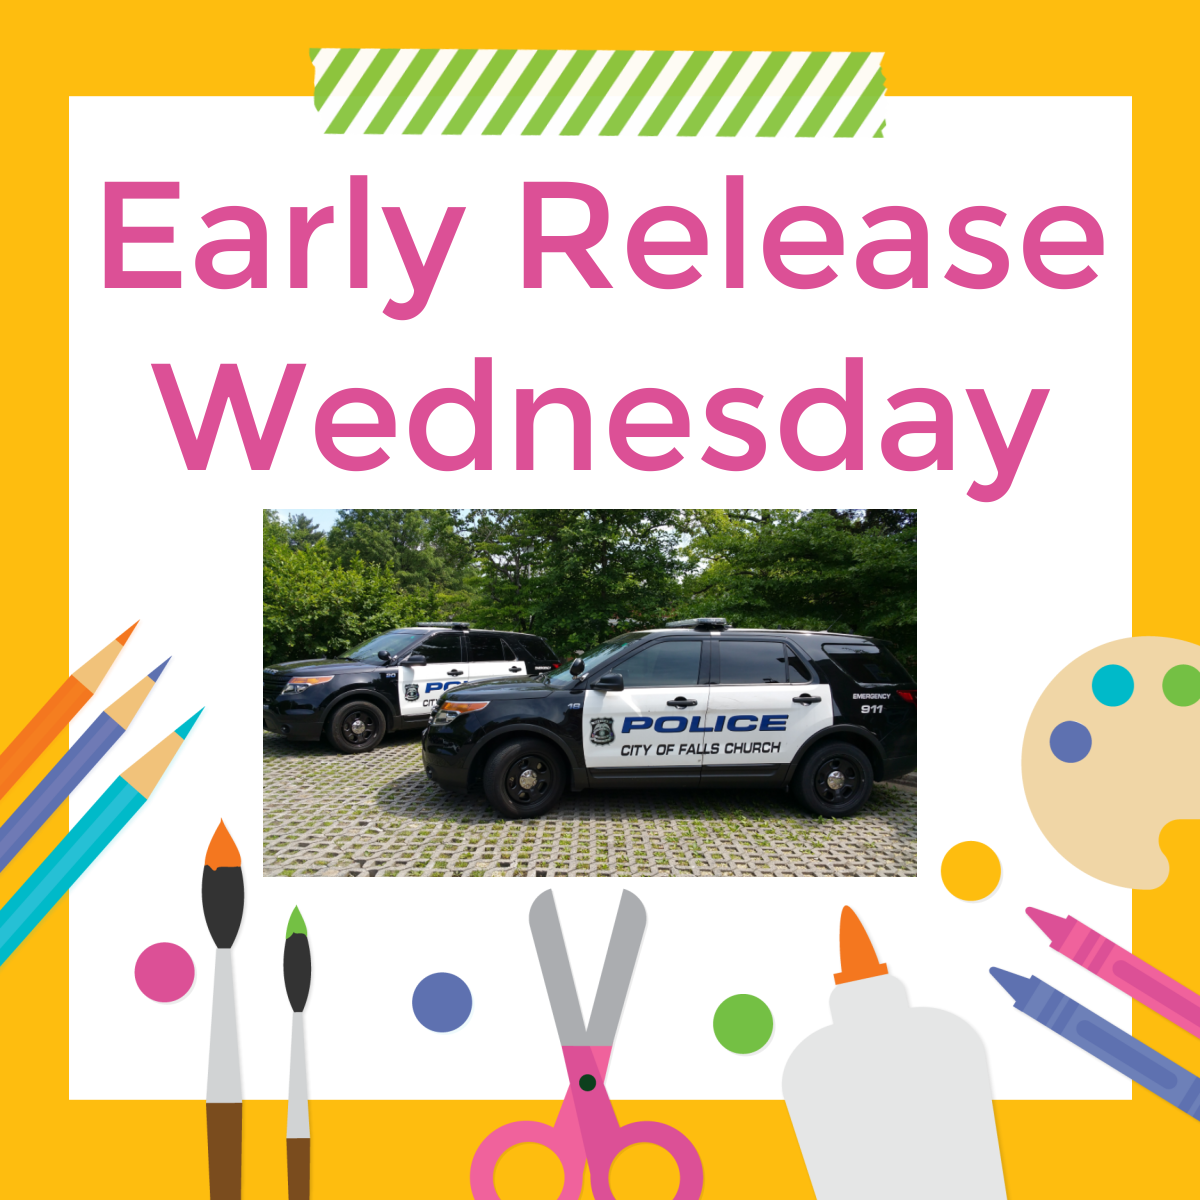 Early Release Wednesday icon with Police vehicles